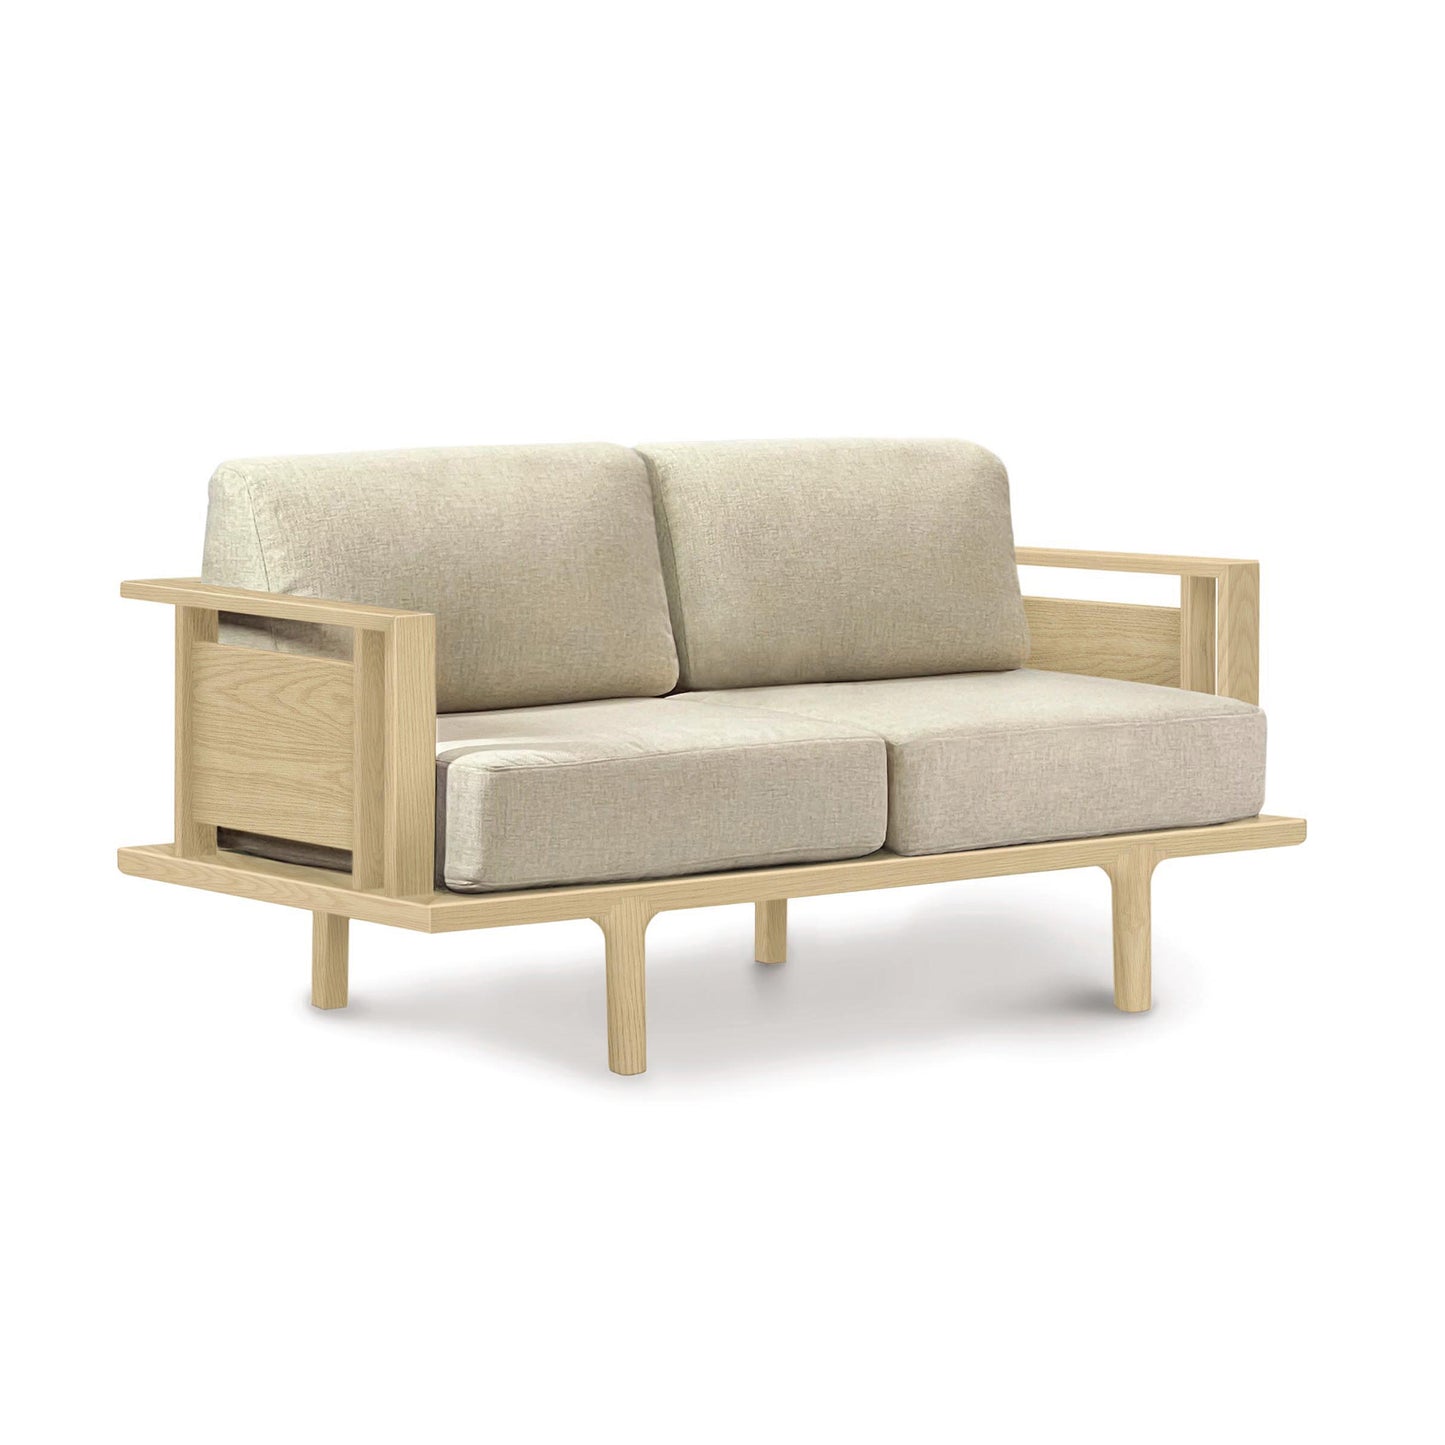 A skillfully crafted Copeland Furniture Sierra Oak Upholstered Loveseat with a contemporary design.